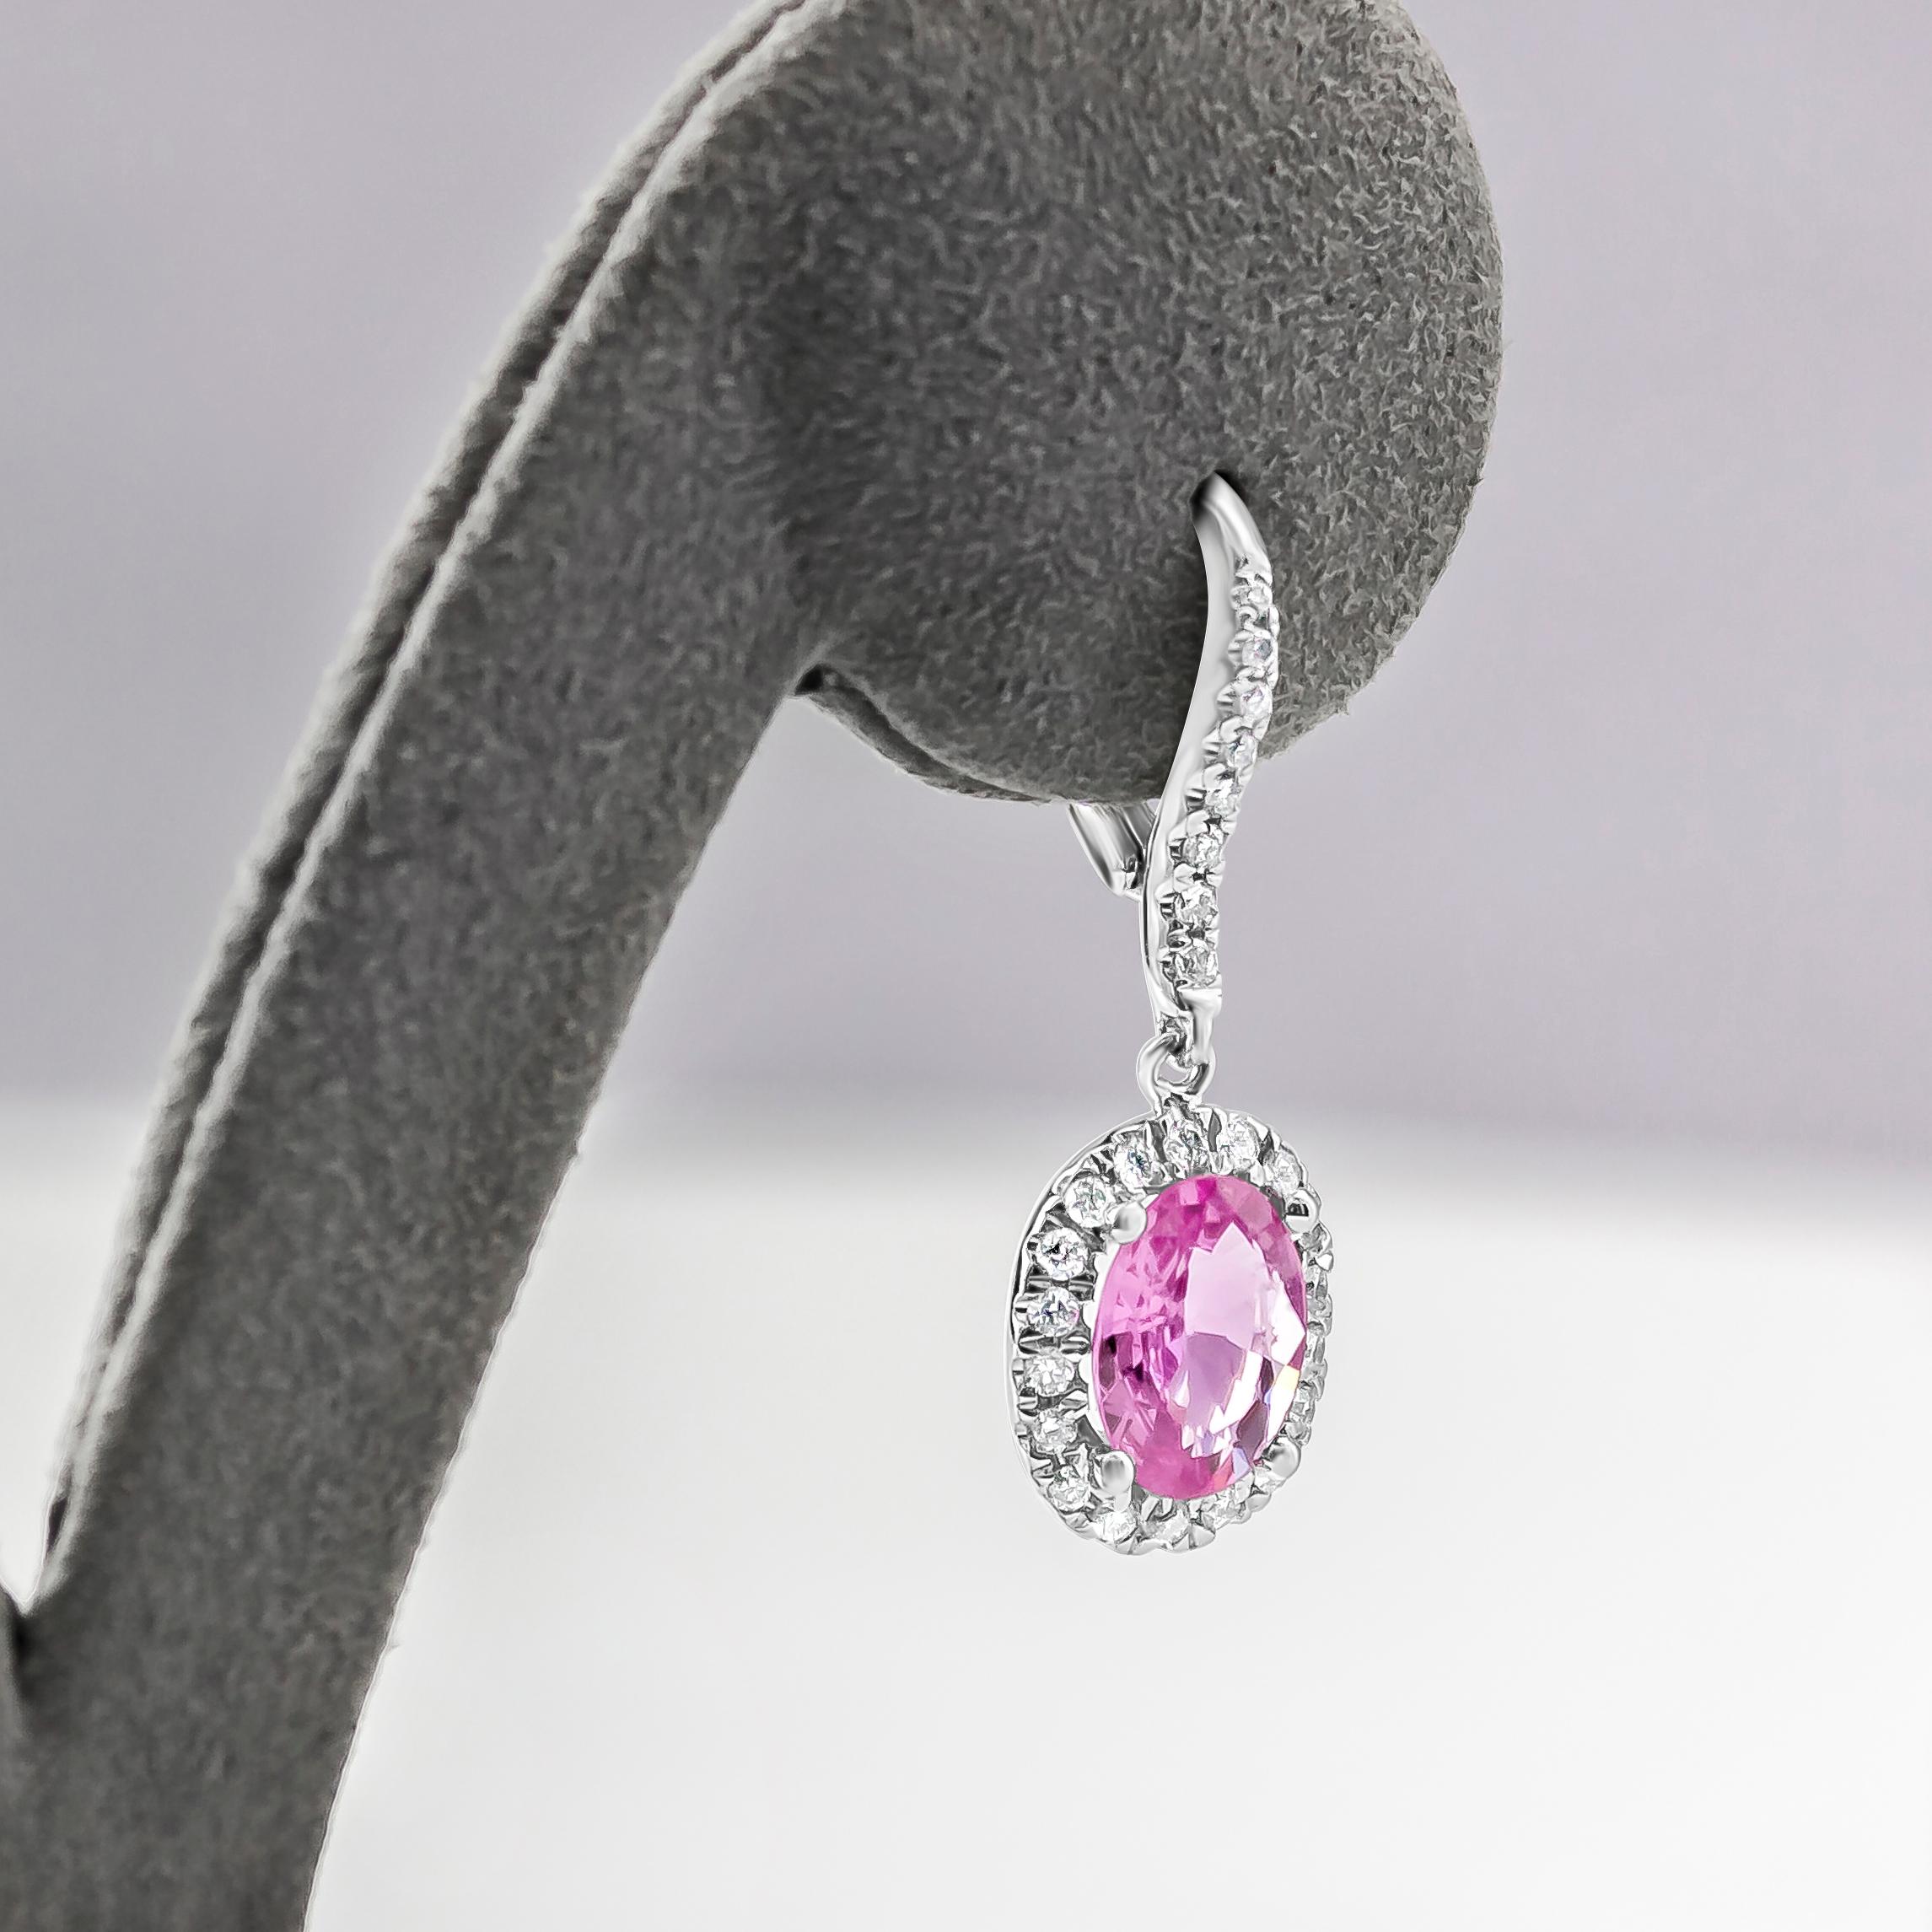 Pair of dangle earrings set with oval cut pink sapphires weighing 2.29 carats total, surrounded by brilliant round diamonds. Attached on a diamond encrusted lever back. Diamonds weigh 0.39 carats.

Style available in different price ranges. Prices